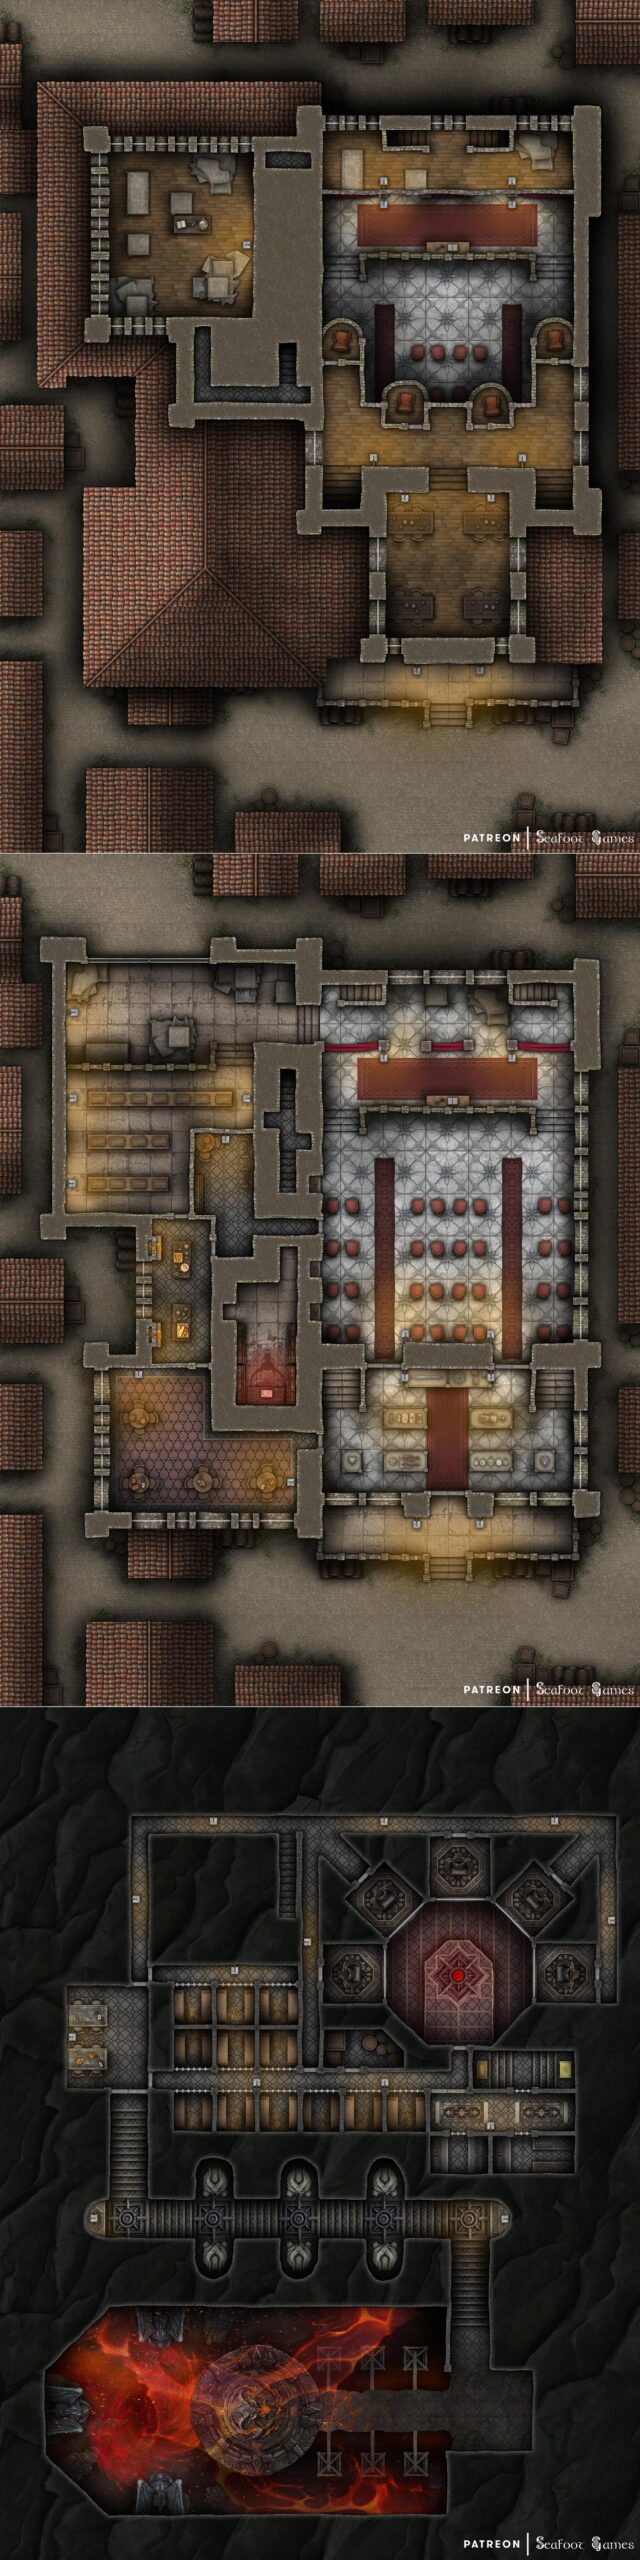 Devilbend Auction House Free 40x30 Multi-Level Battlemap , with a hidden and distinctly evil basement level replete with a variety of group or isolation prison cells, torture cages, and a portal to the hells. VTT ready!